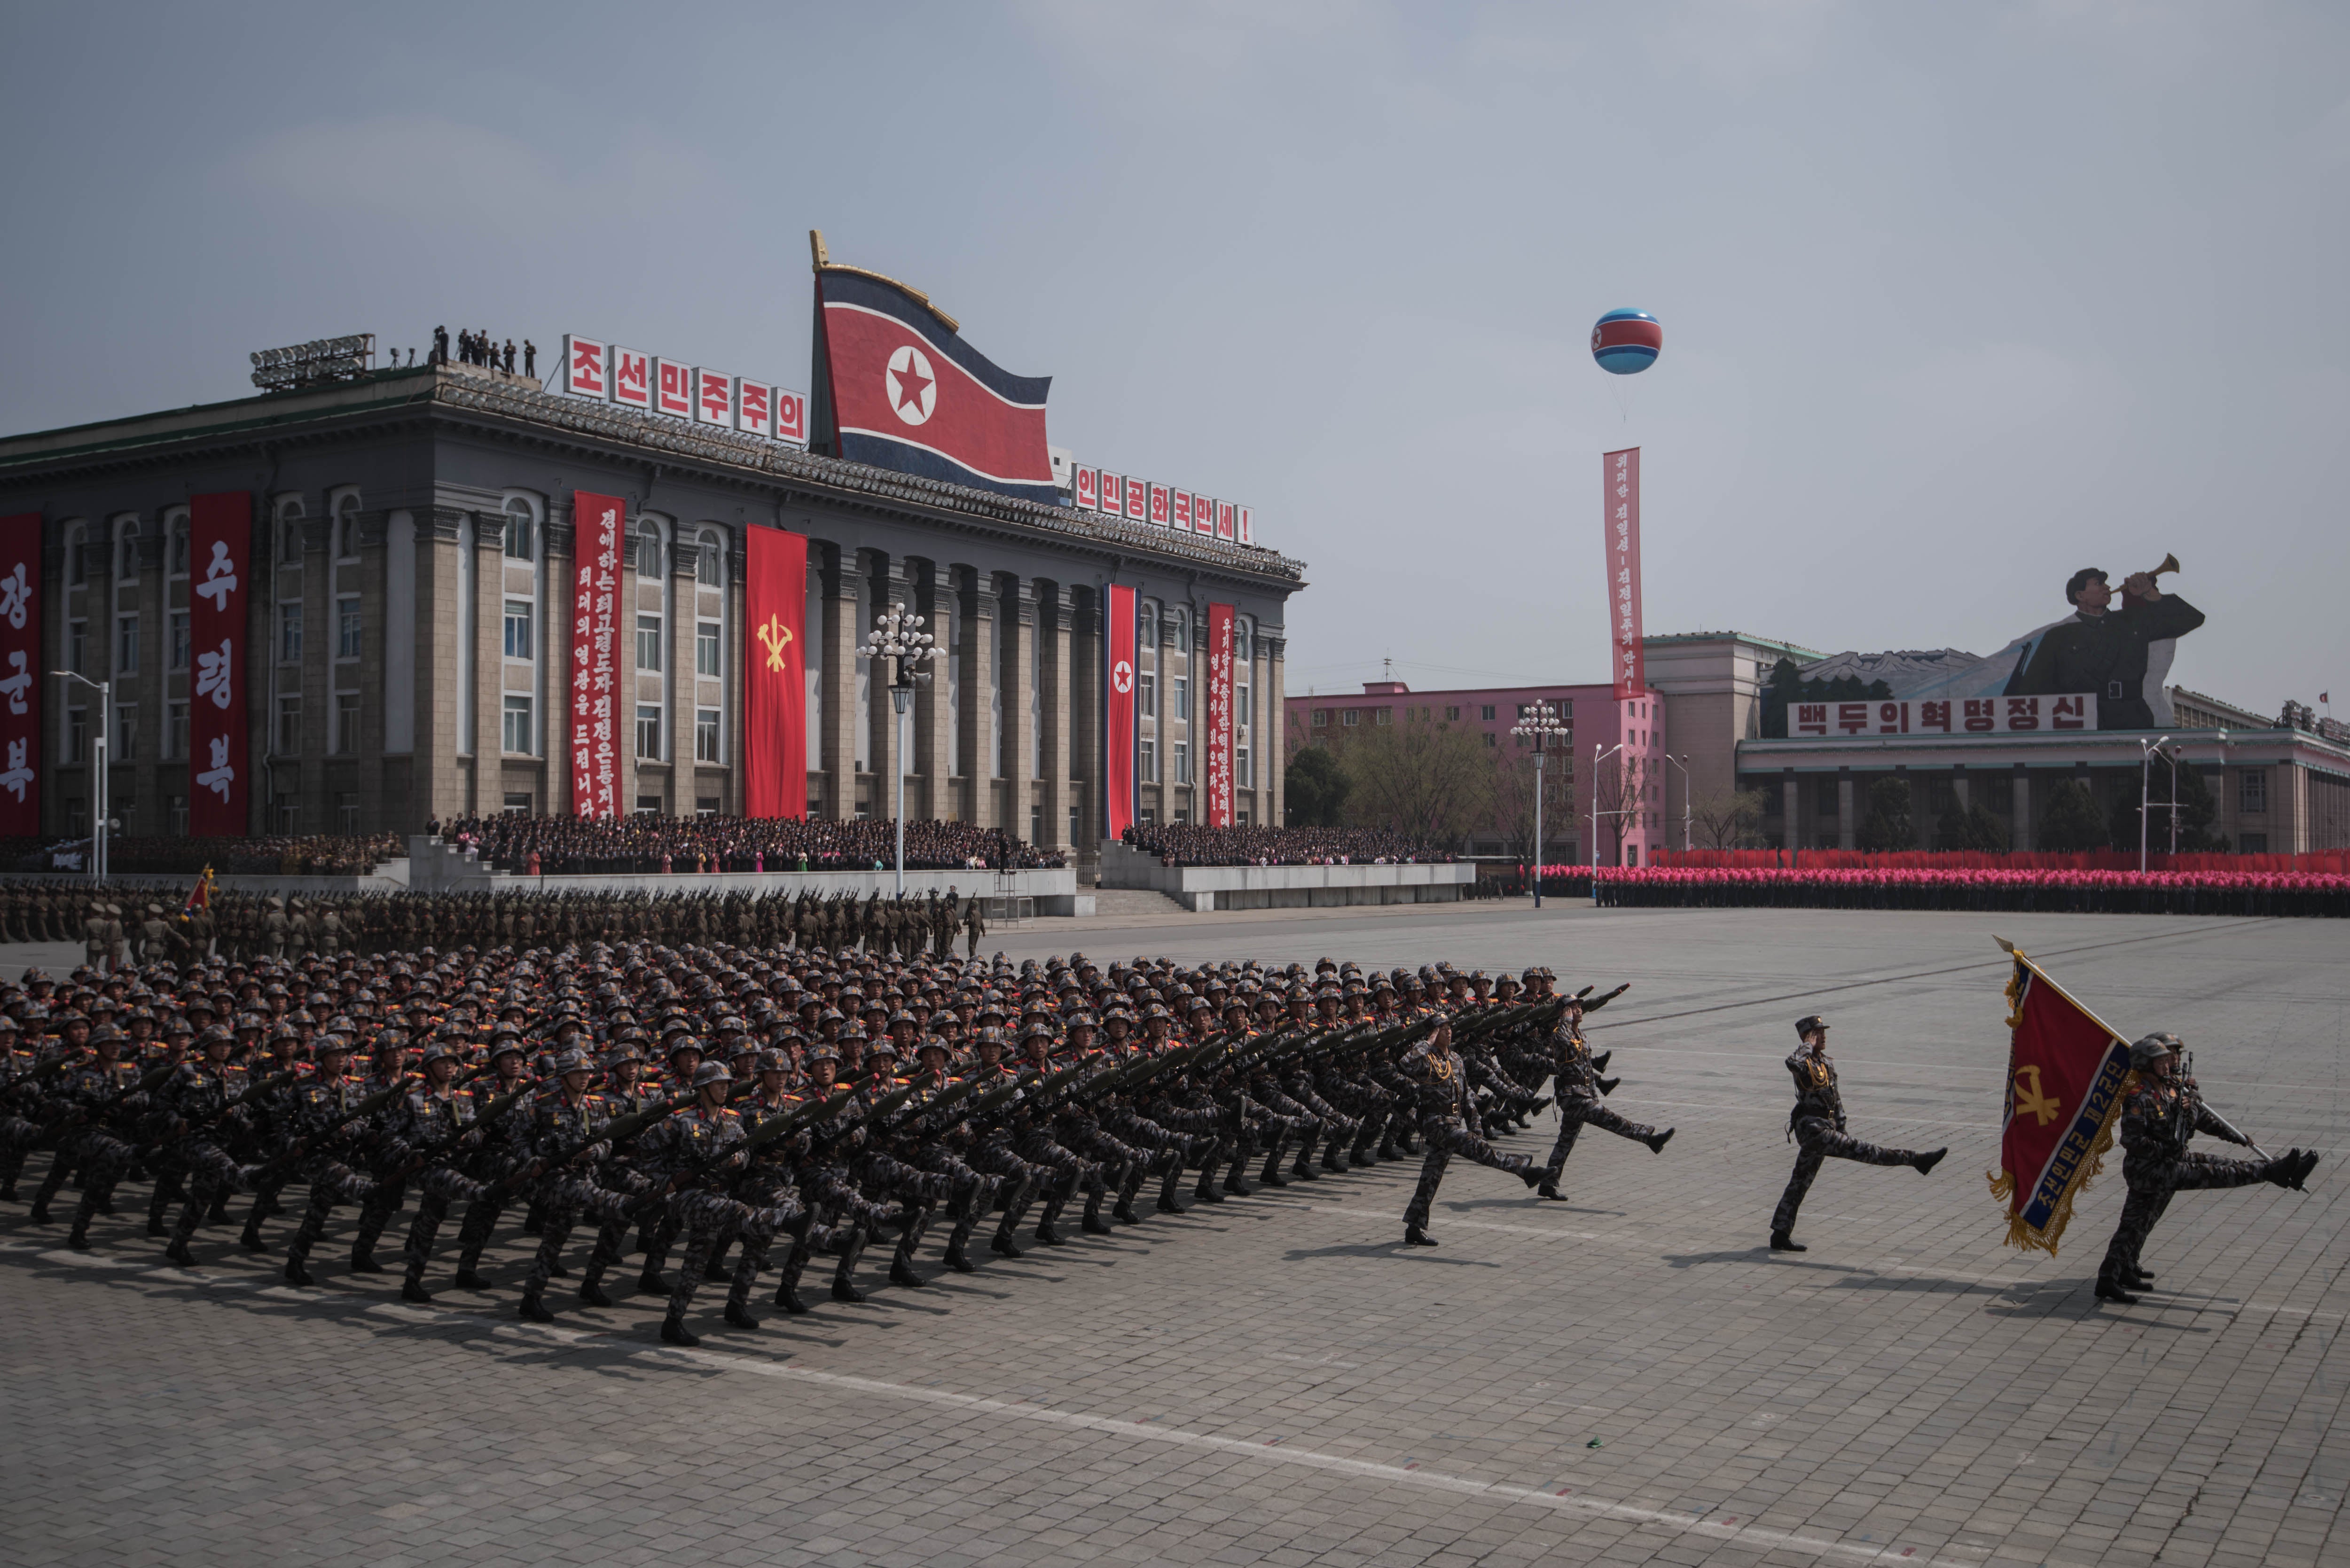 North Korea remains firmly a Soviet-style communism 1.0 state